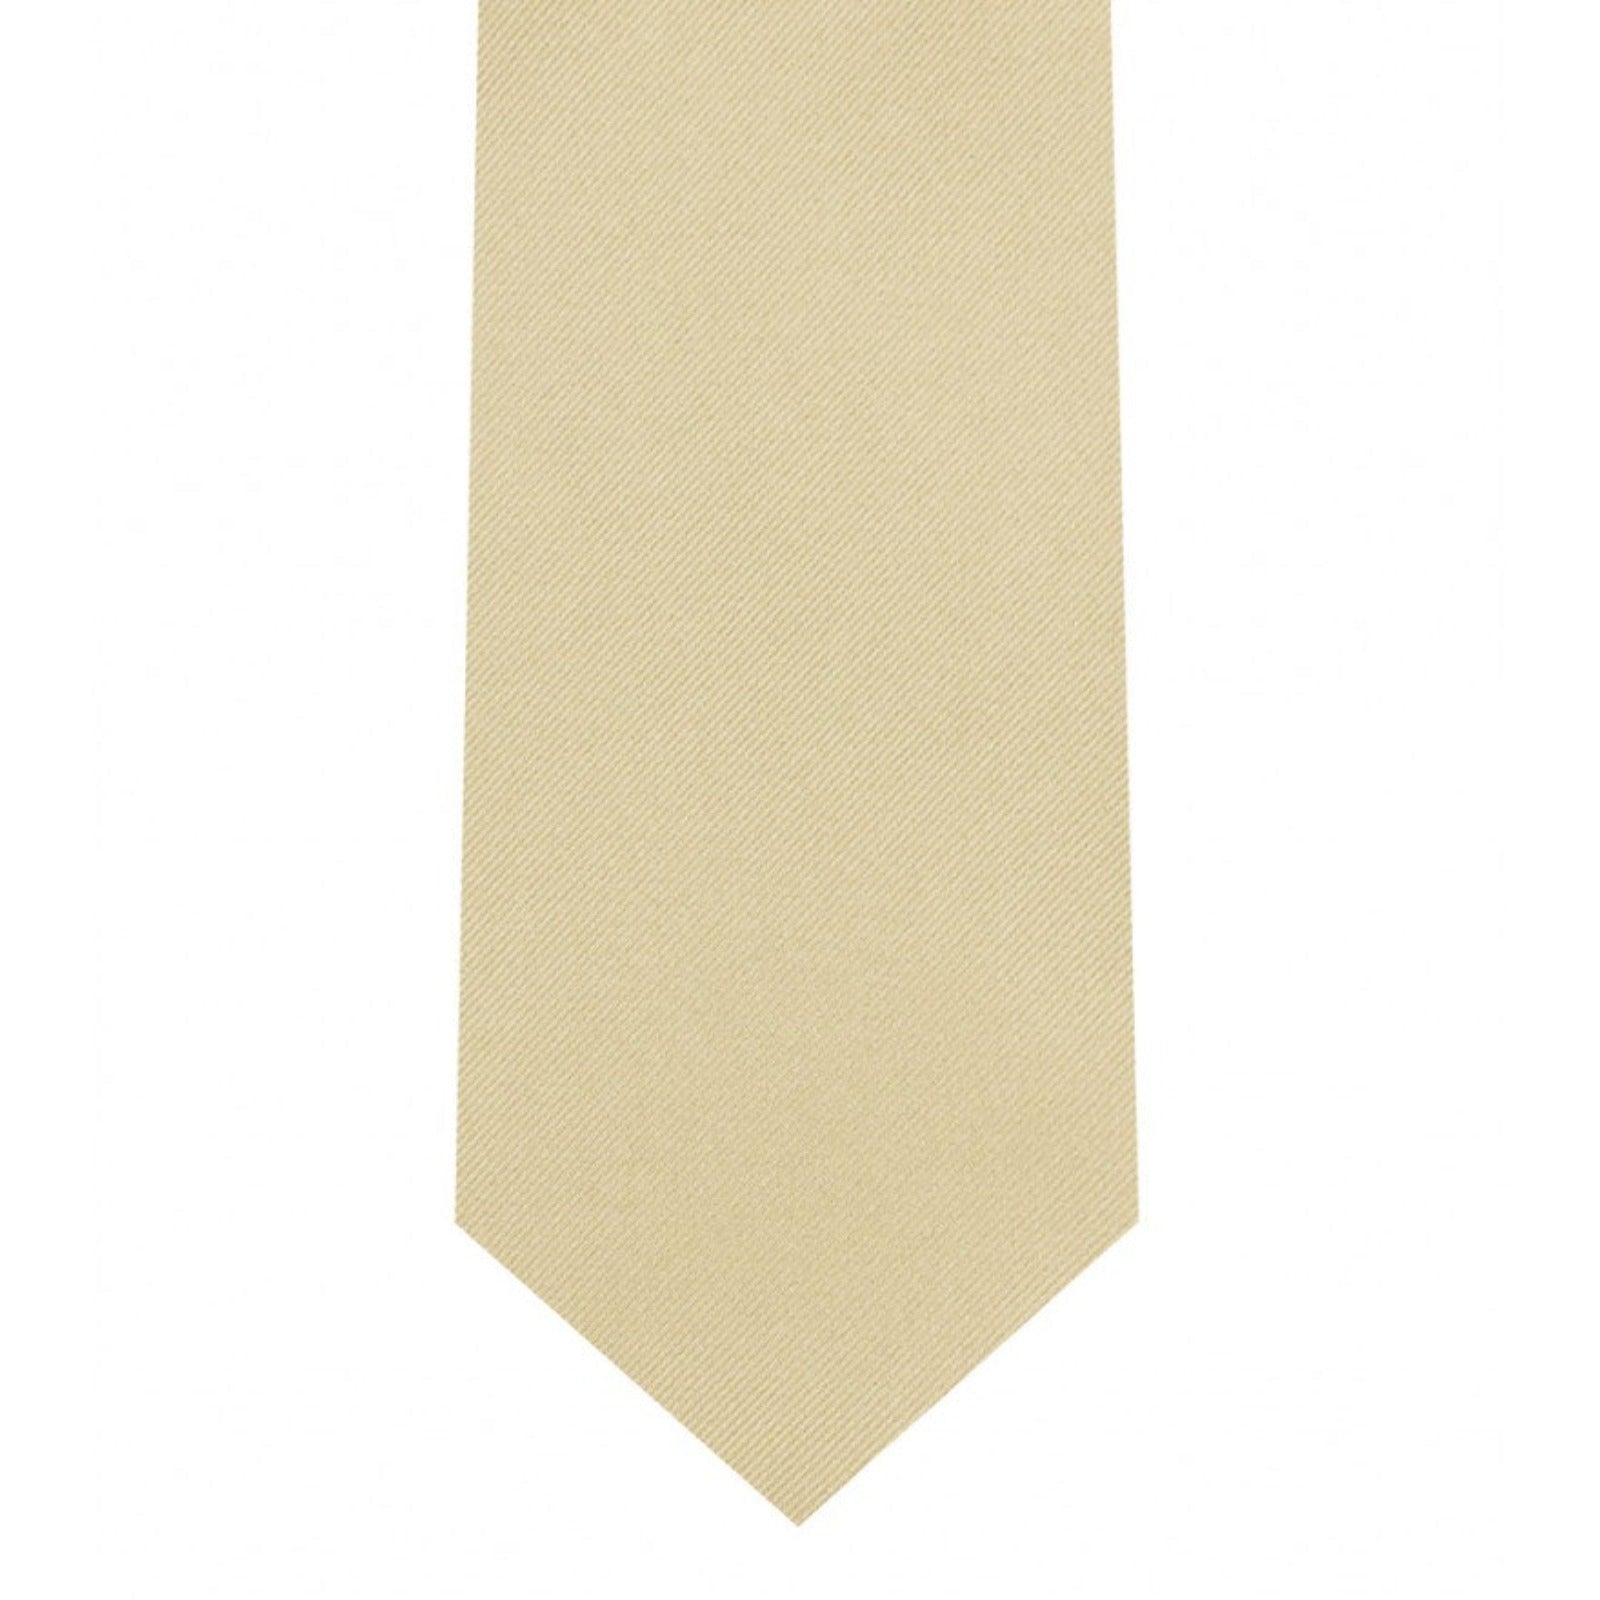 Classic Beige Tie Skinny width 2.75 inches With Matching Pocket Square | KCT Menswear